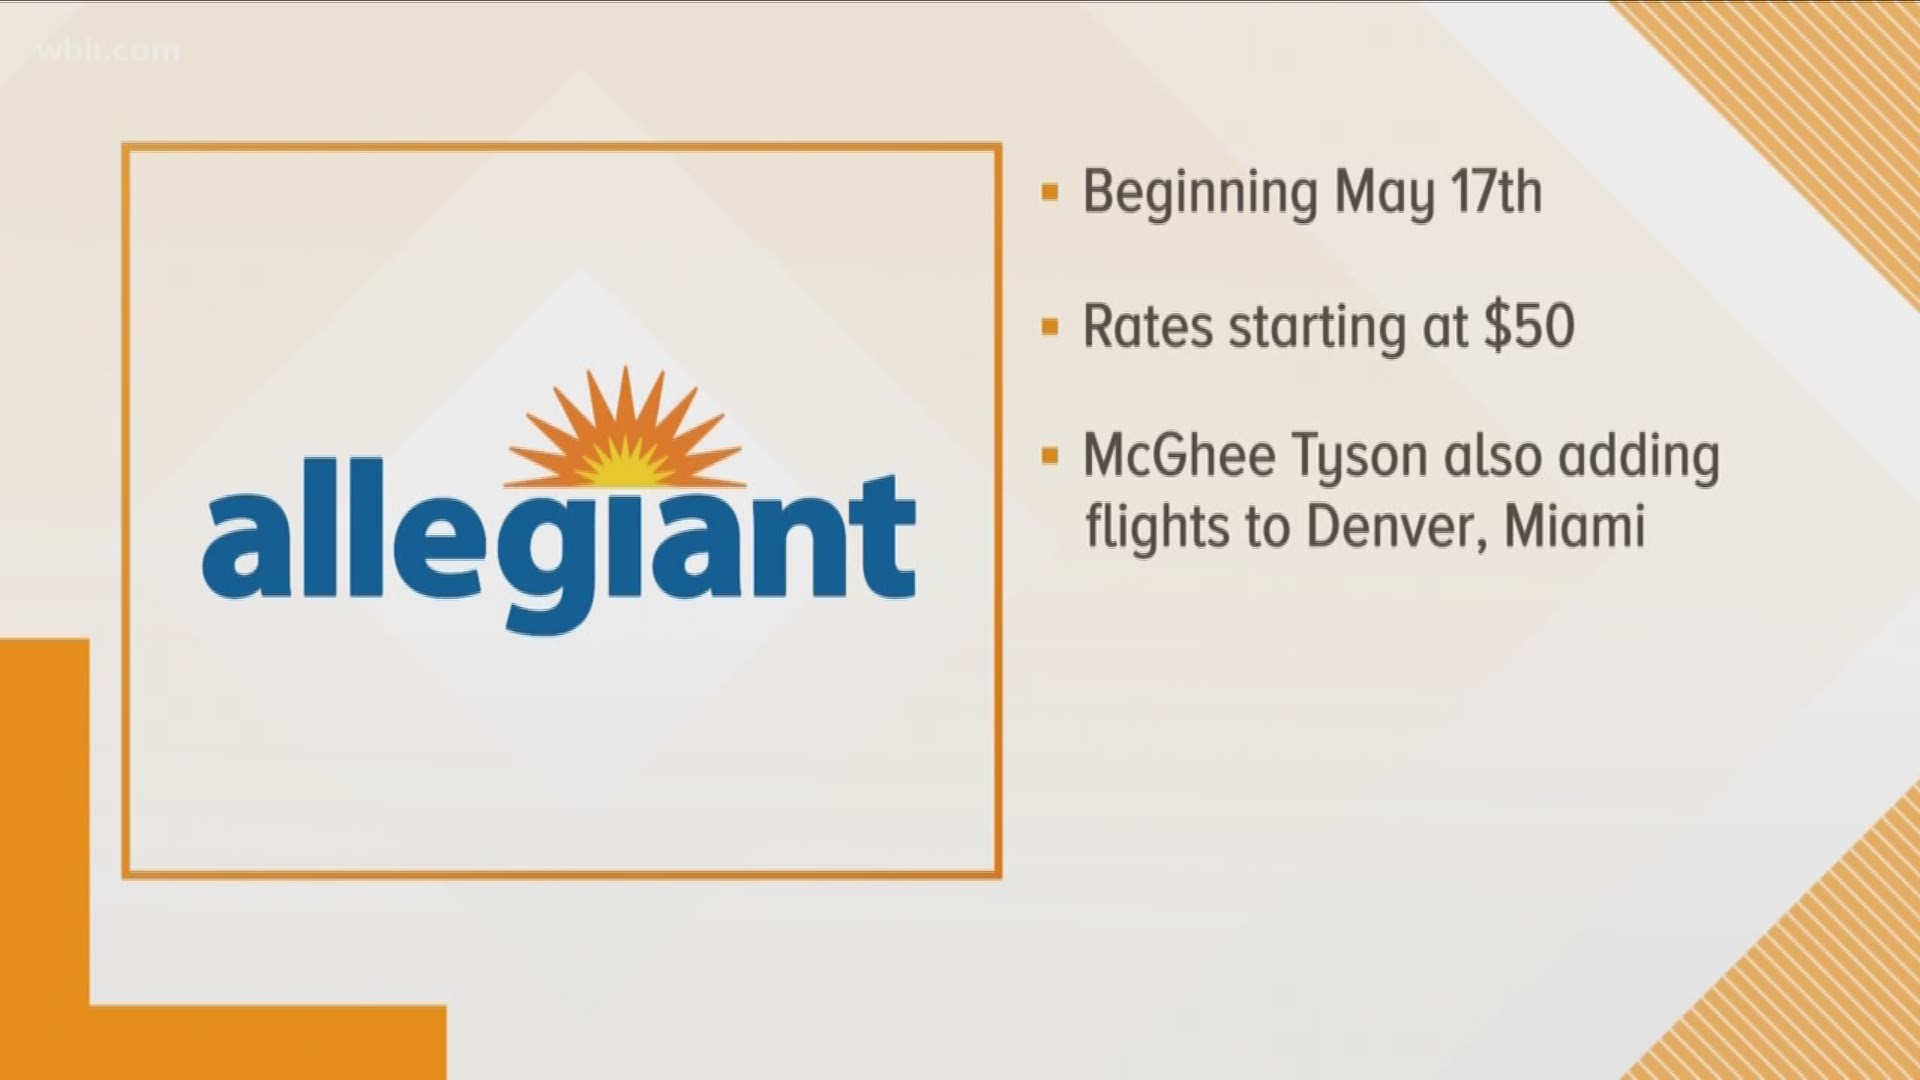 Allegiant said it will now offer nonstop flights to Pittsburgh from Knoxville.